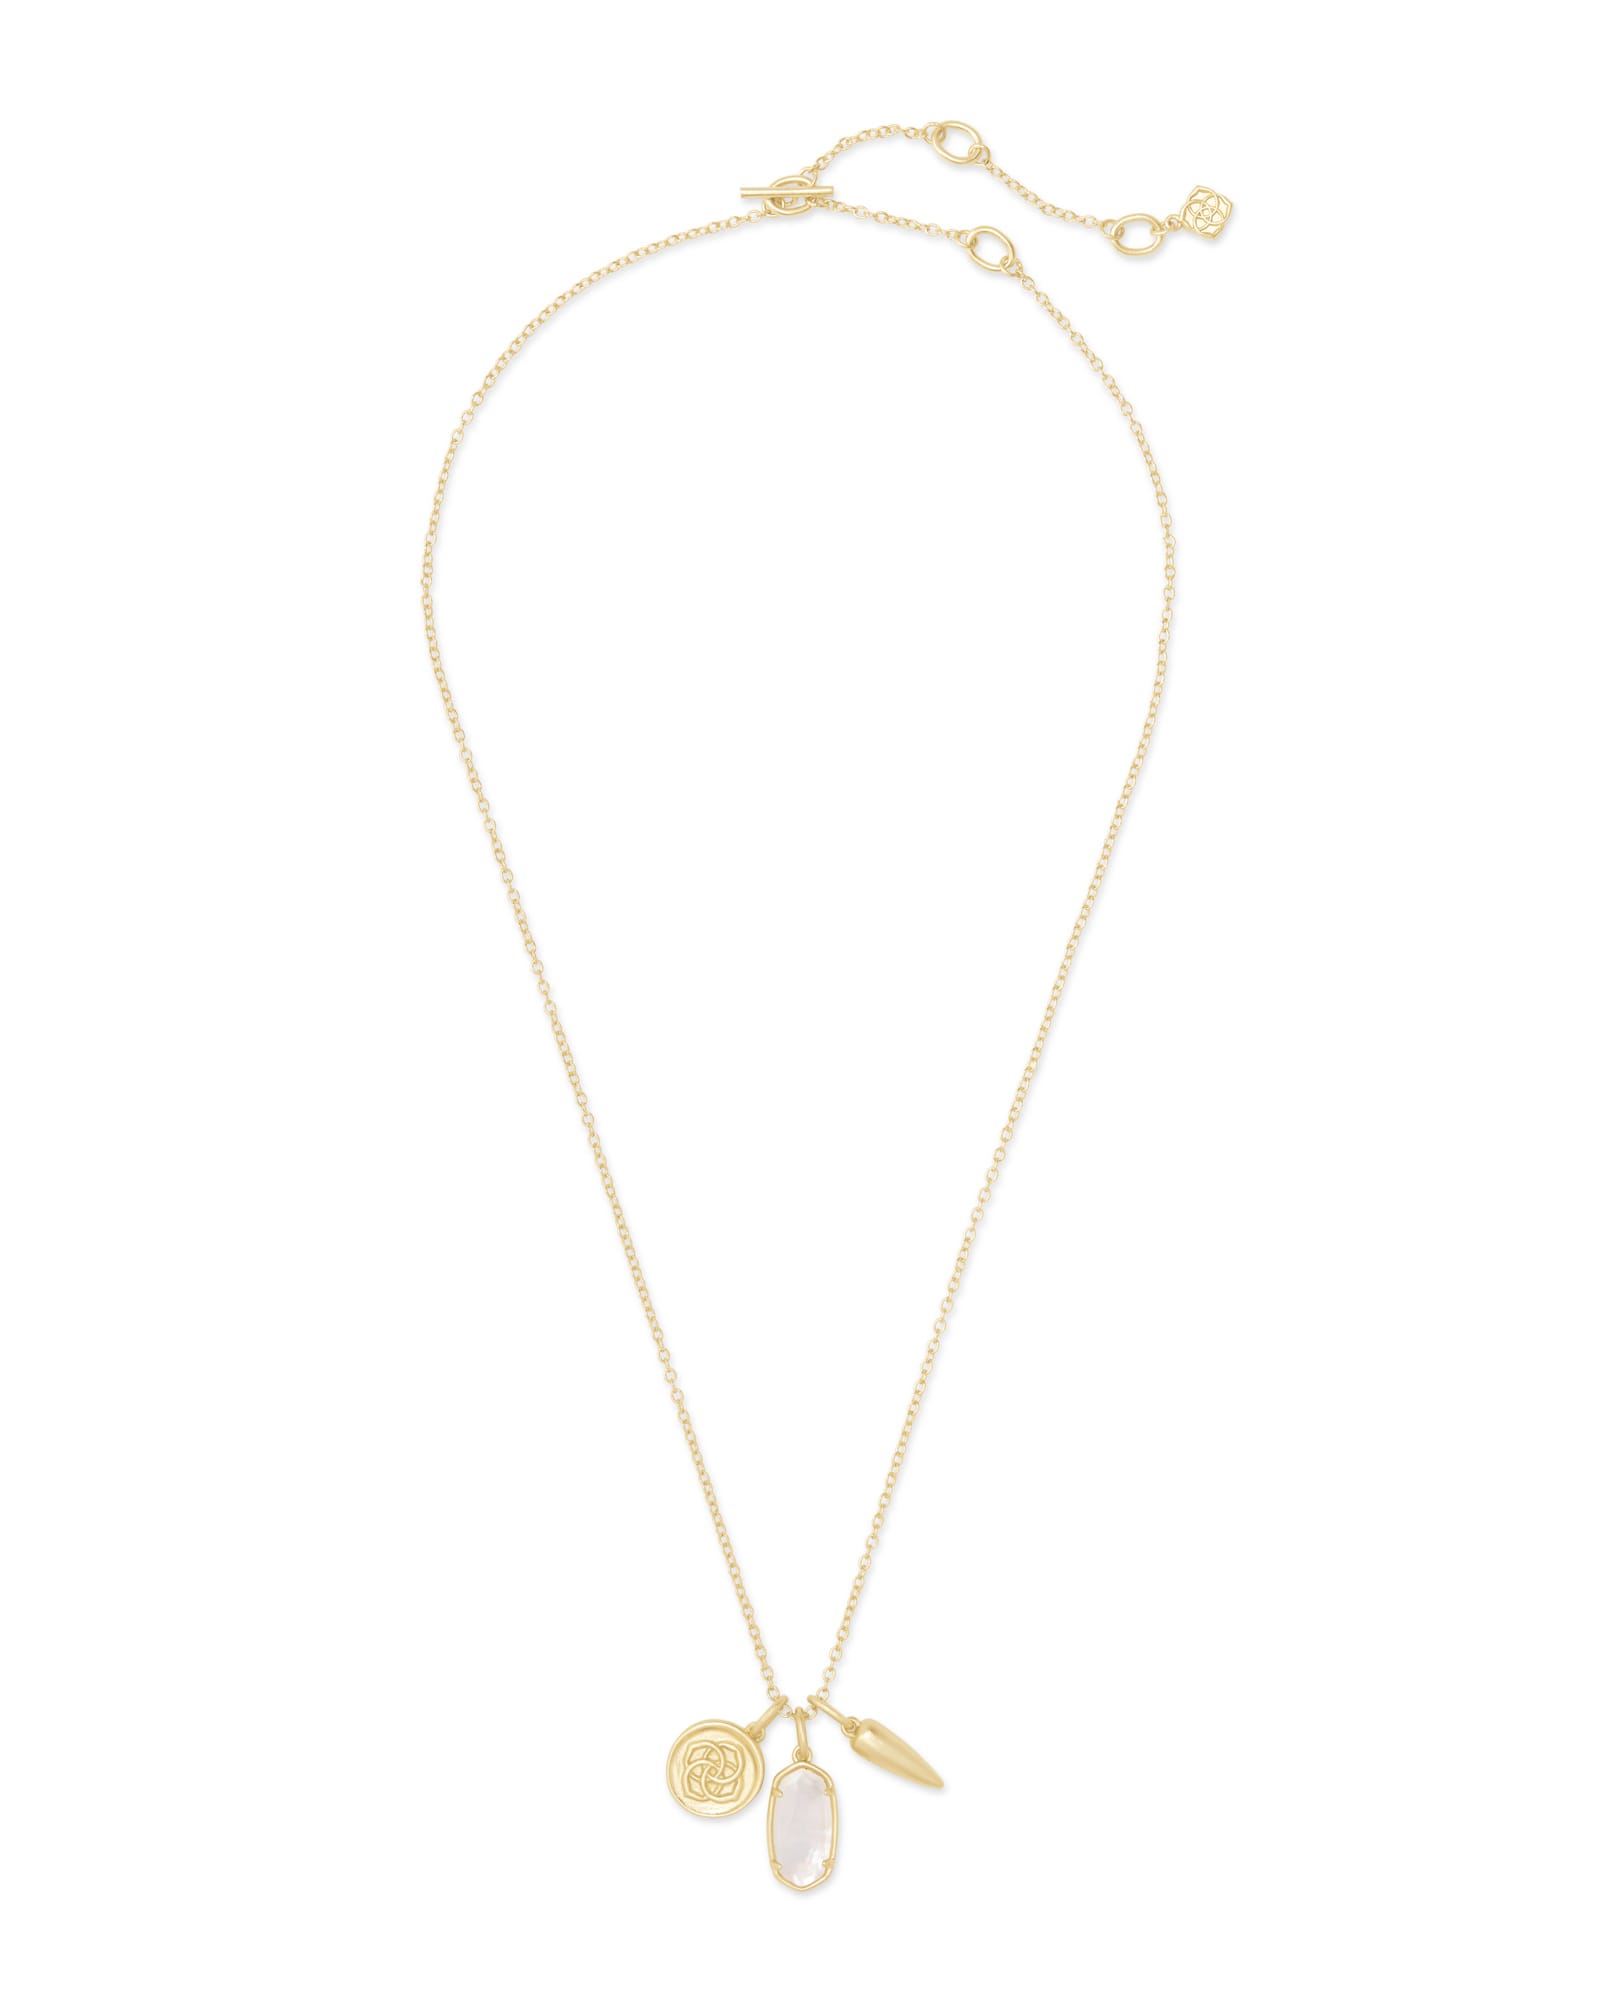 Dira Gold Convertible Coin Charm Necklace in Ivory Mother of Pearl